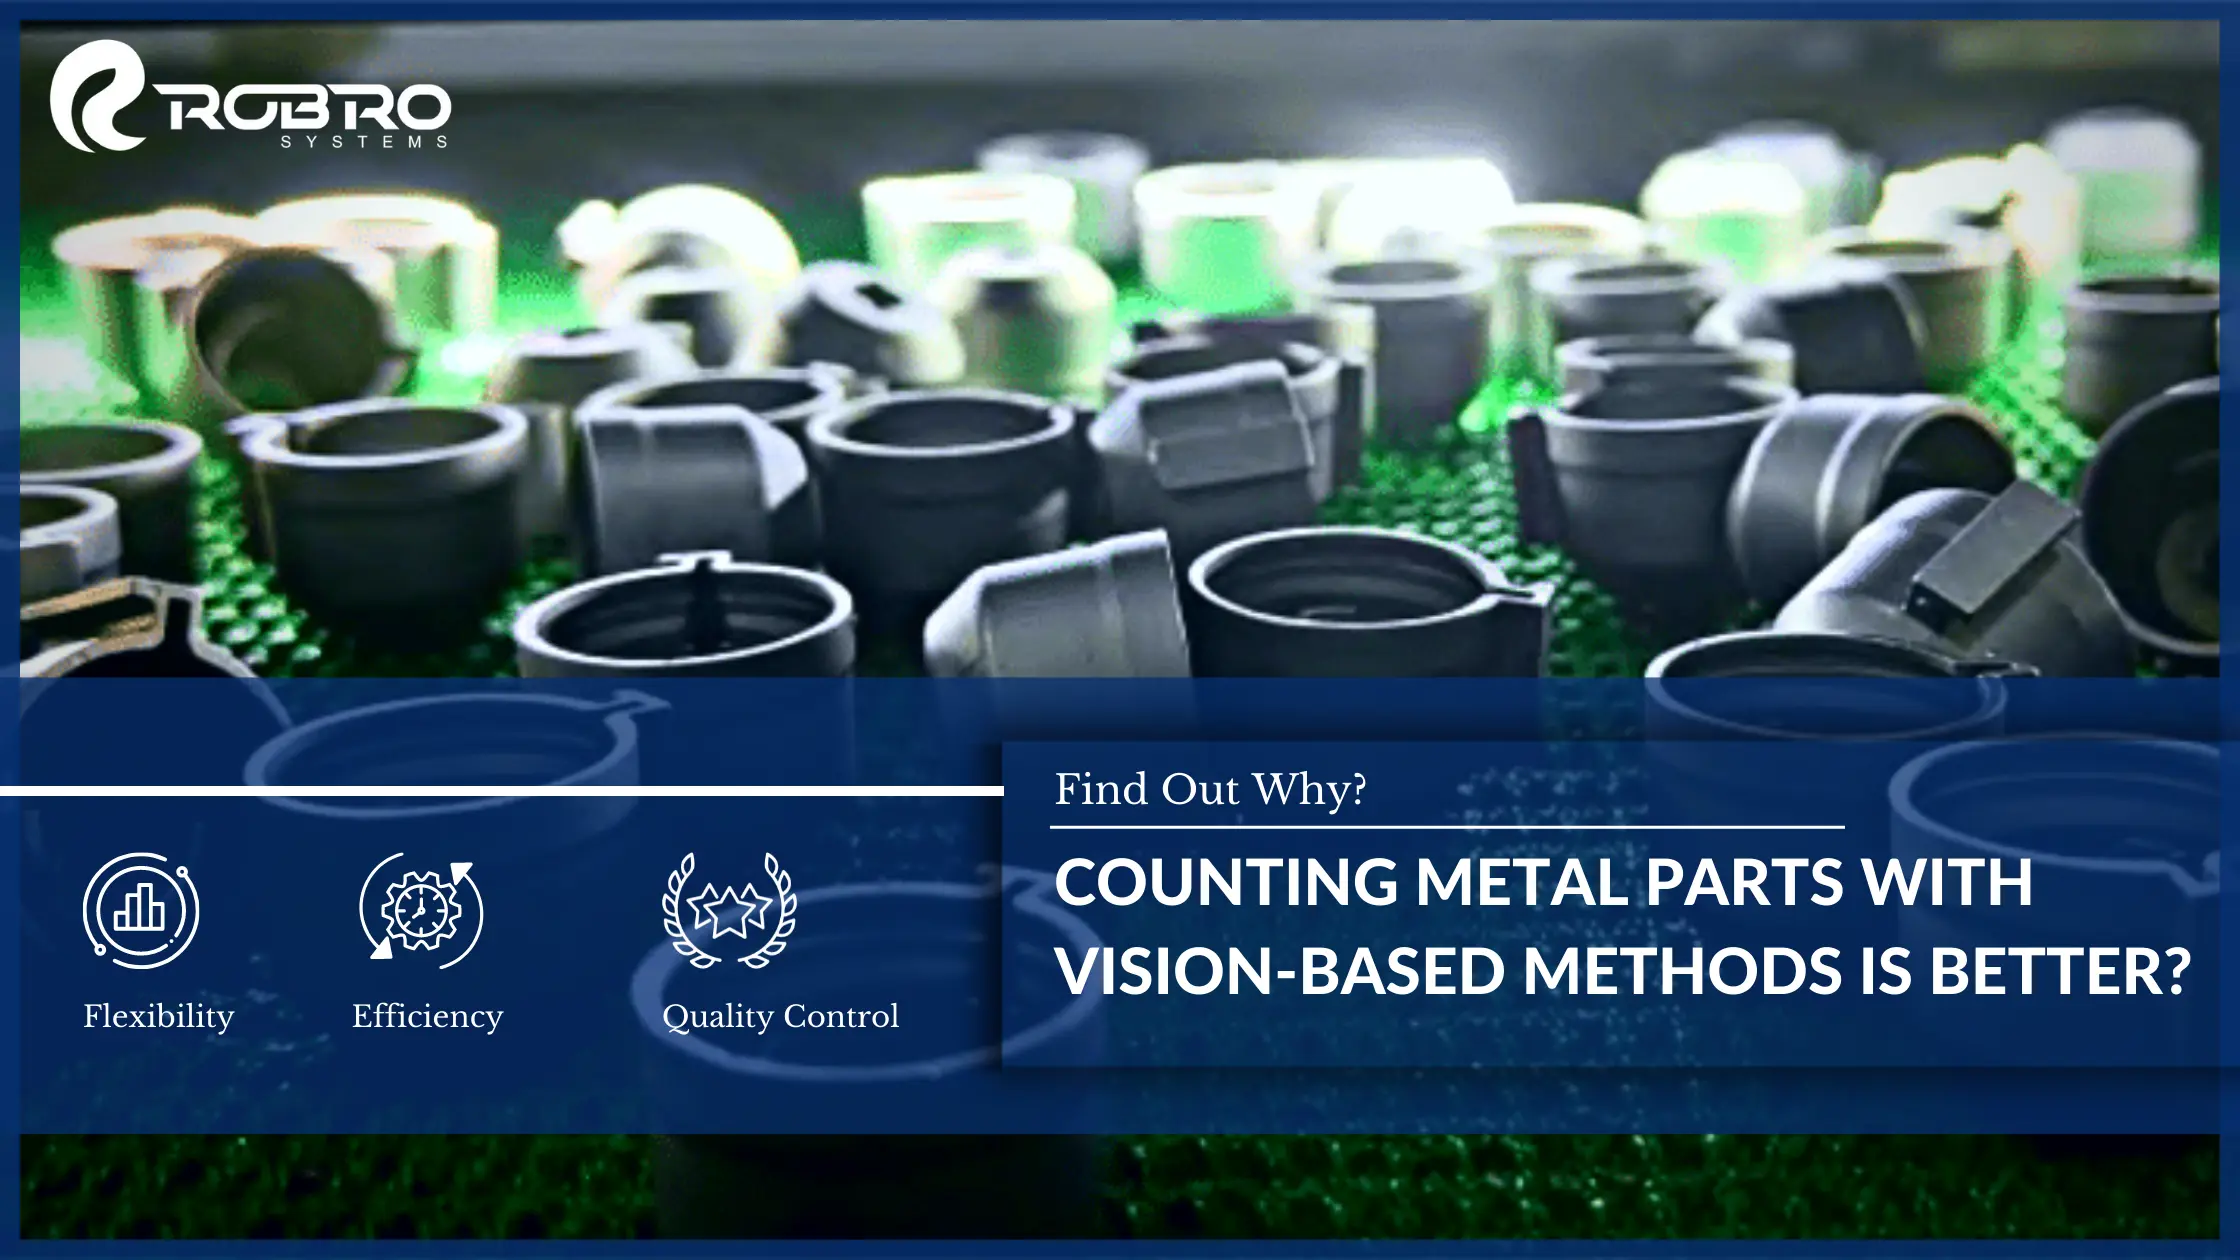 Why counting metal parts with vision-based methods is better than weight-based methods?